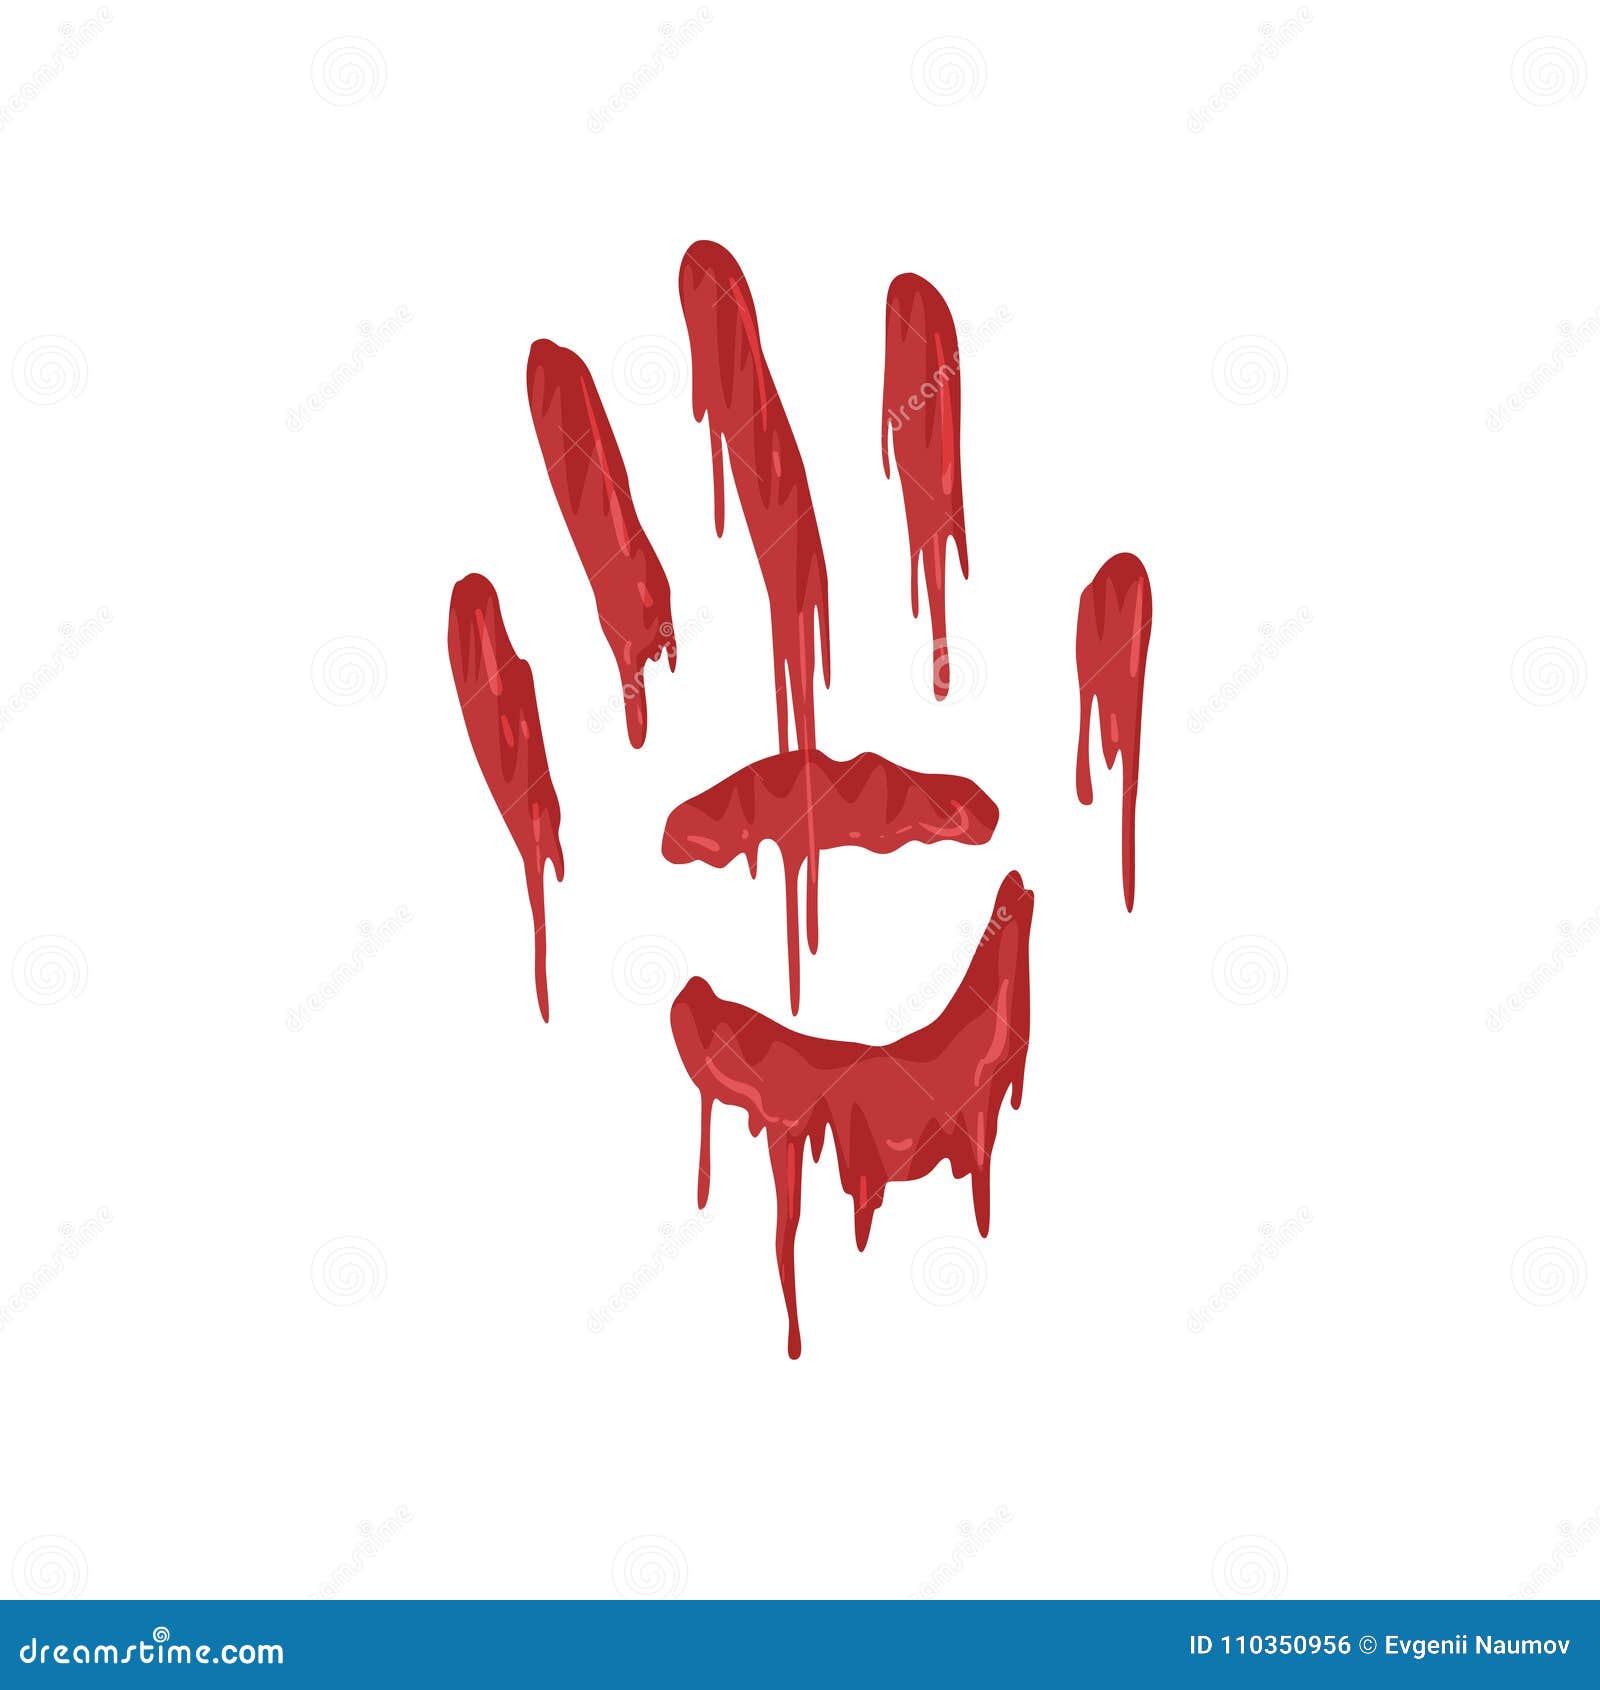 Bloody Handprint With Streaks Vector Illustration On A White Background